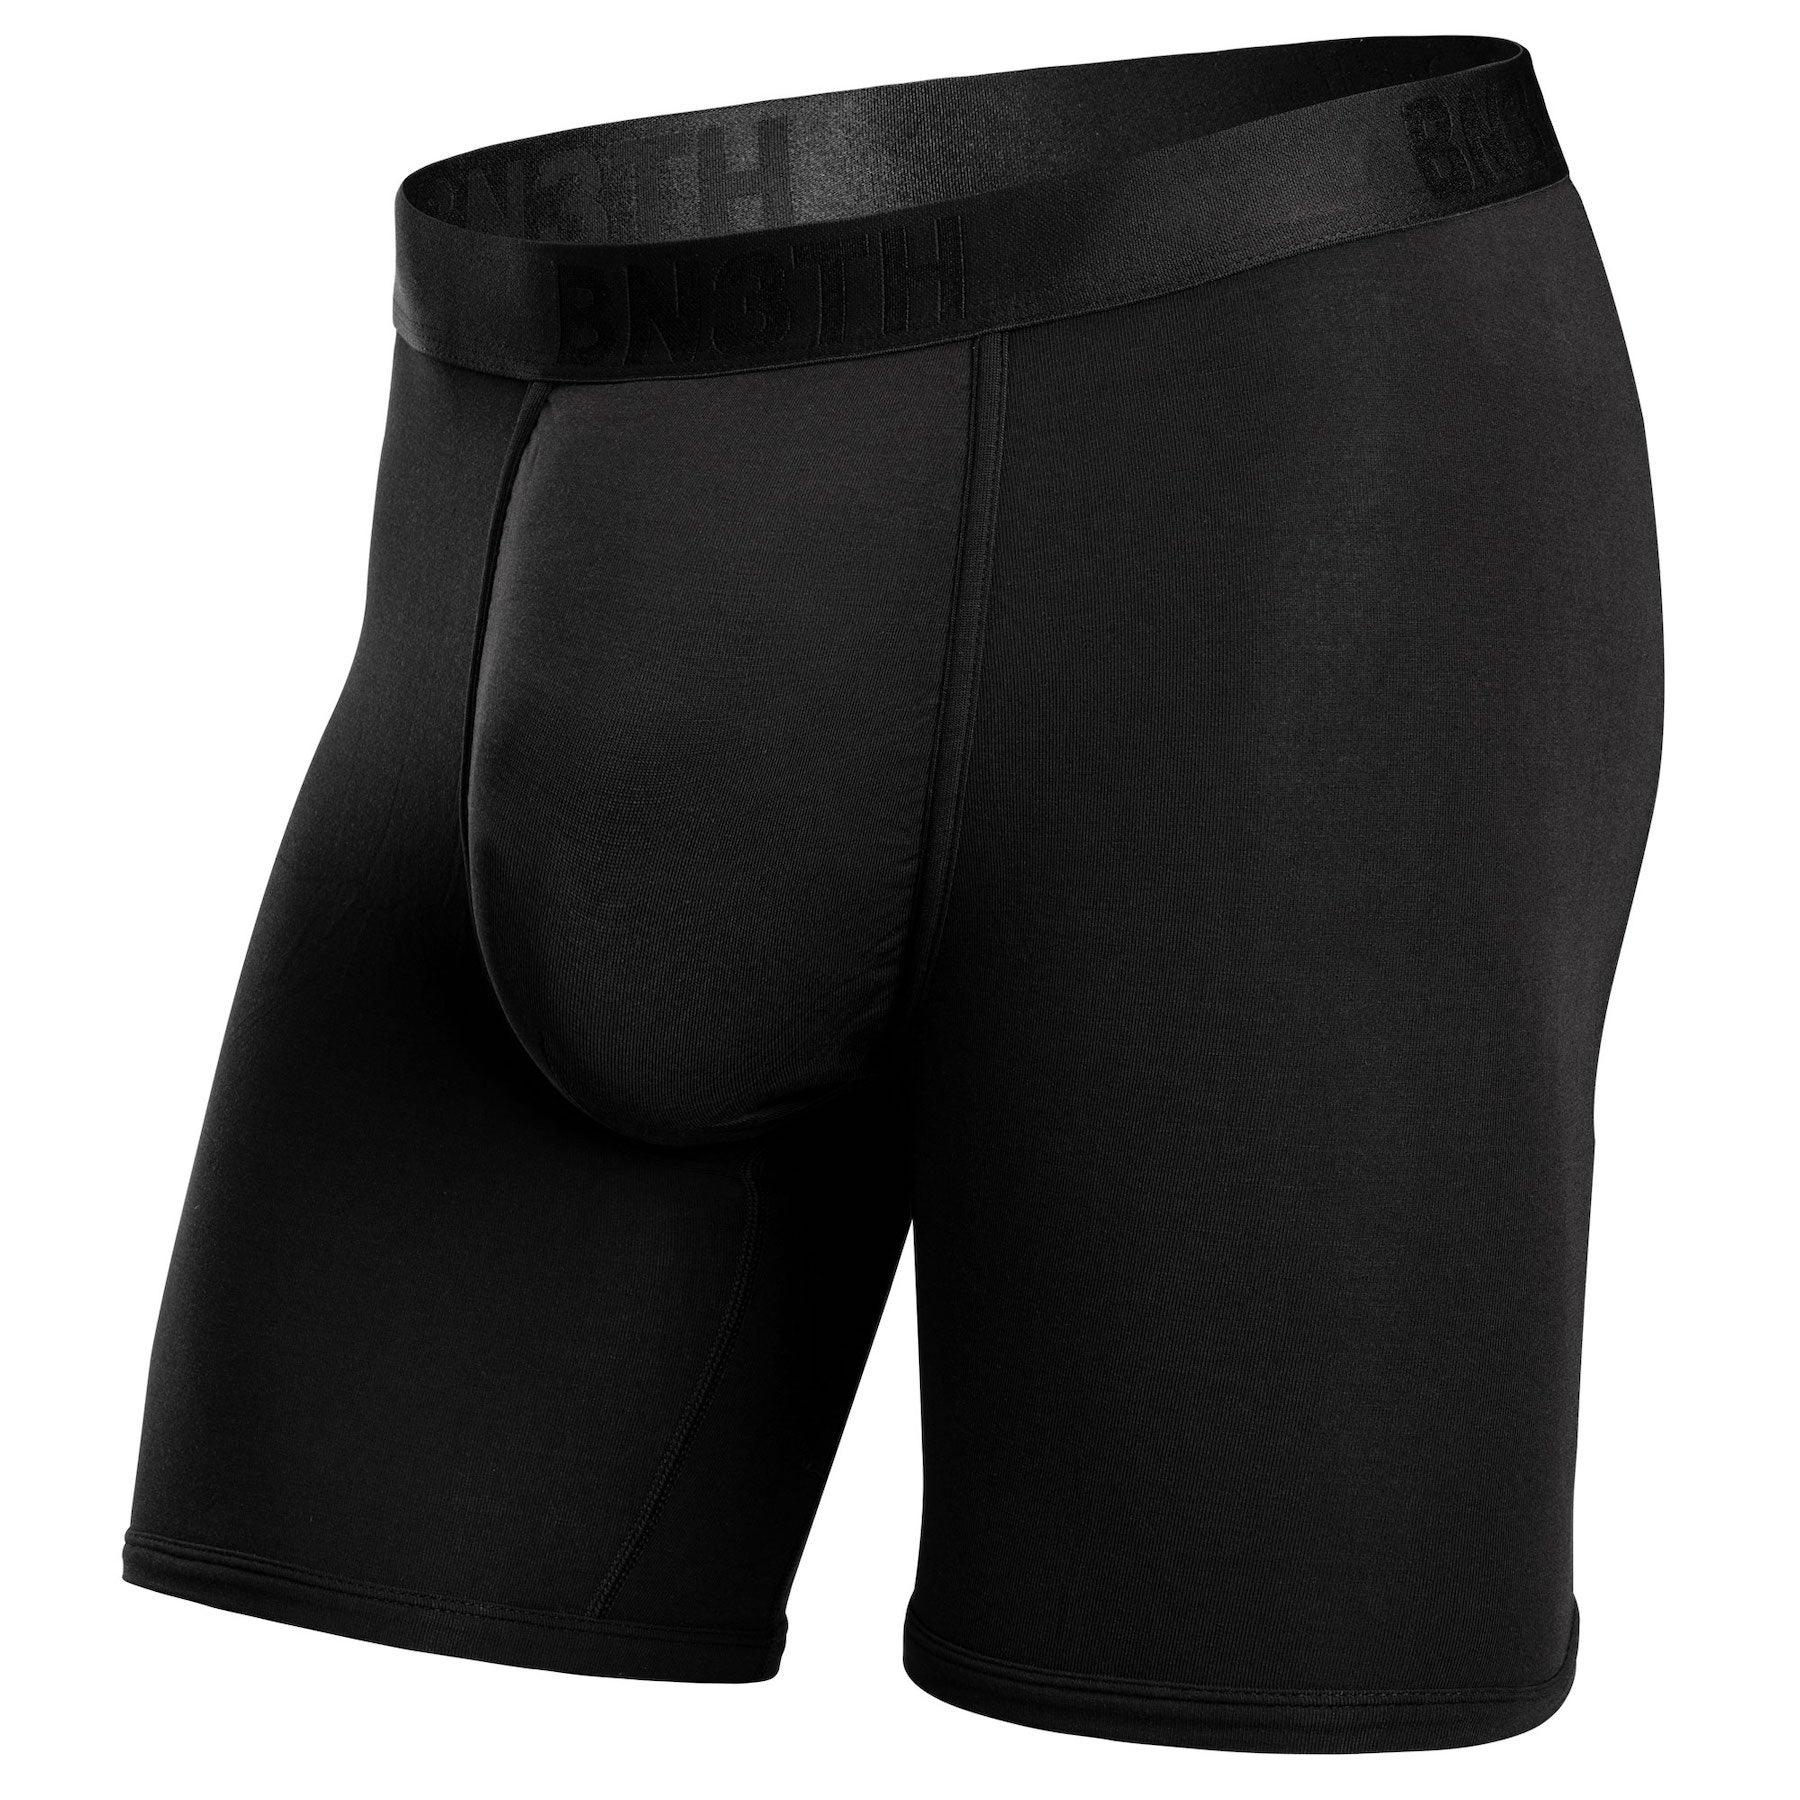 Image showing the BN3TH-M111024-BLK - CLASSIC BOXER BRIEF SOLID - Black which is a Others described by the following info Accessories, New, Others, Released and sold on the IRON HEART GERMANY online store